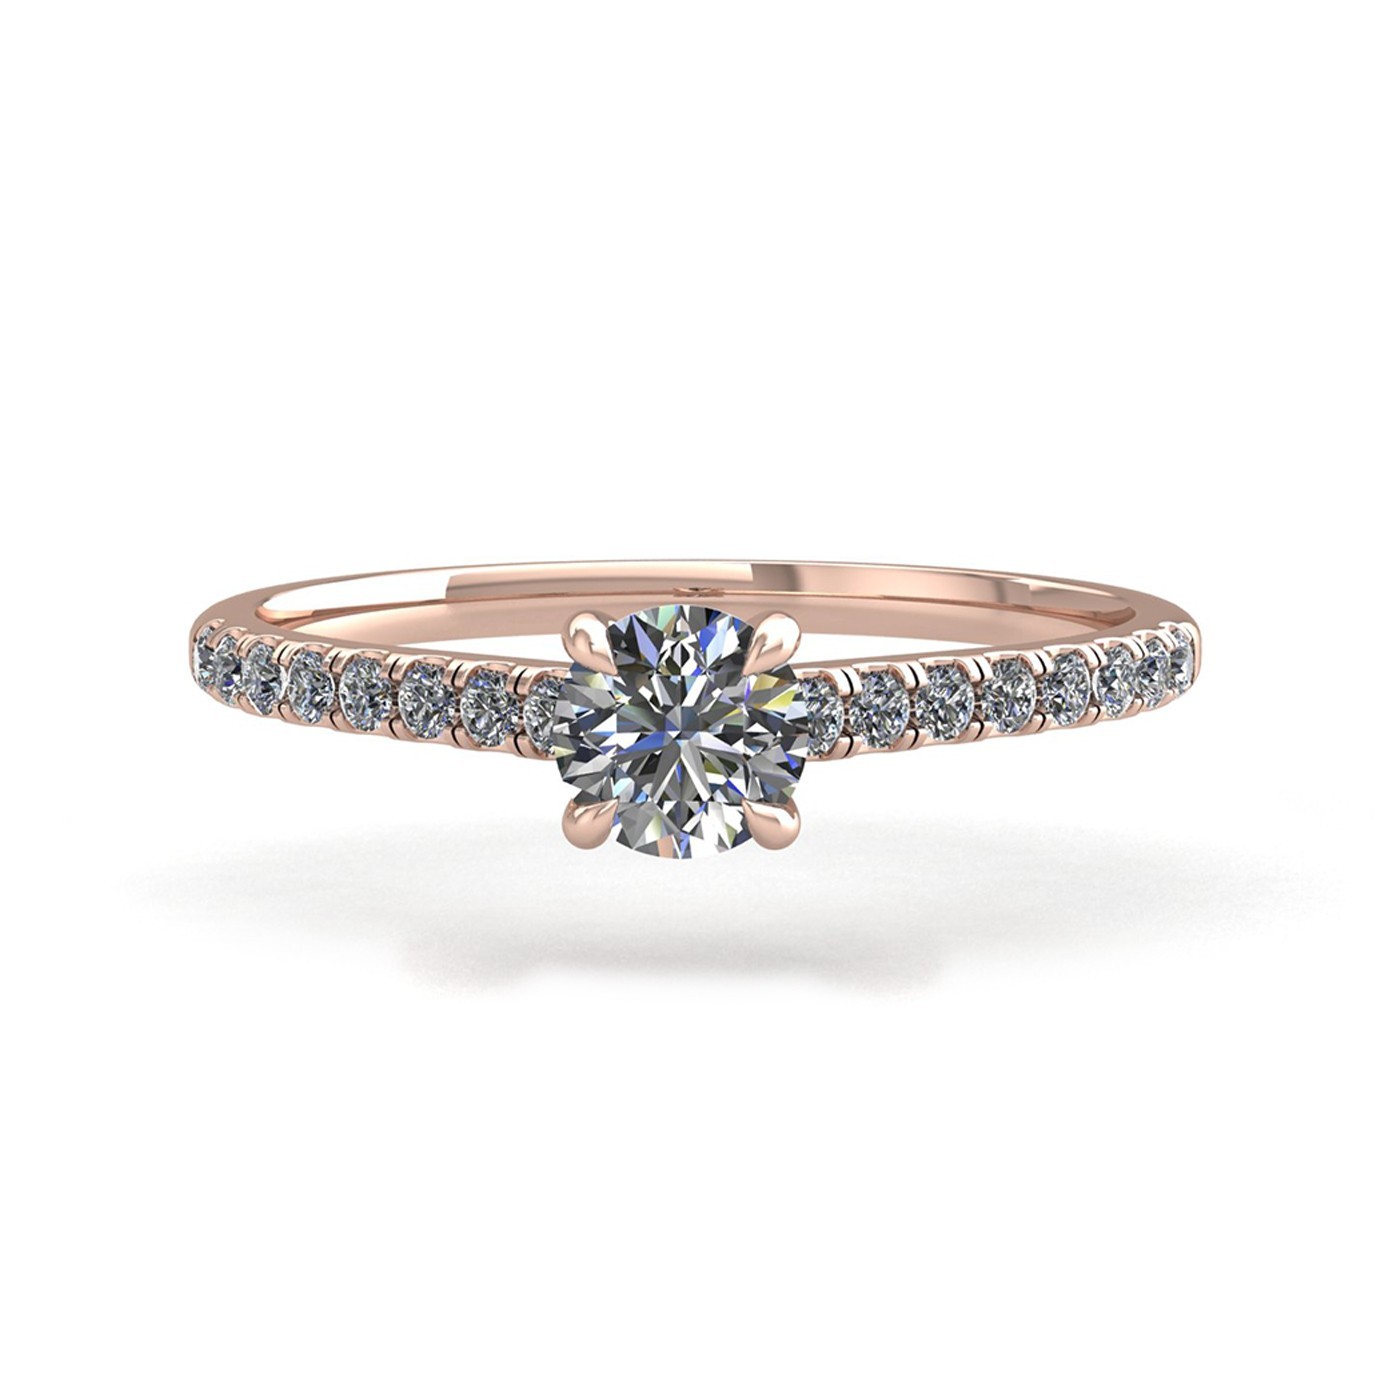 18k rose gold 2.0ct 4 prongs round cut diamond engagement ring with whisper thin pavÉ set band Photos & images